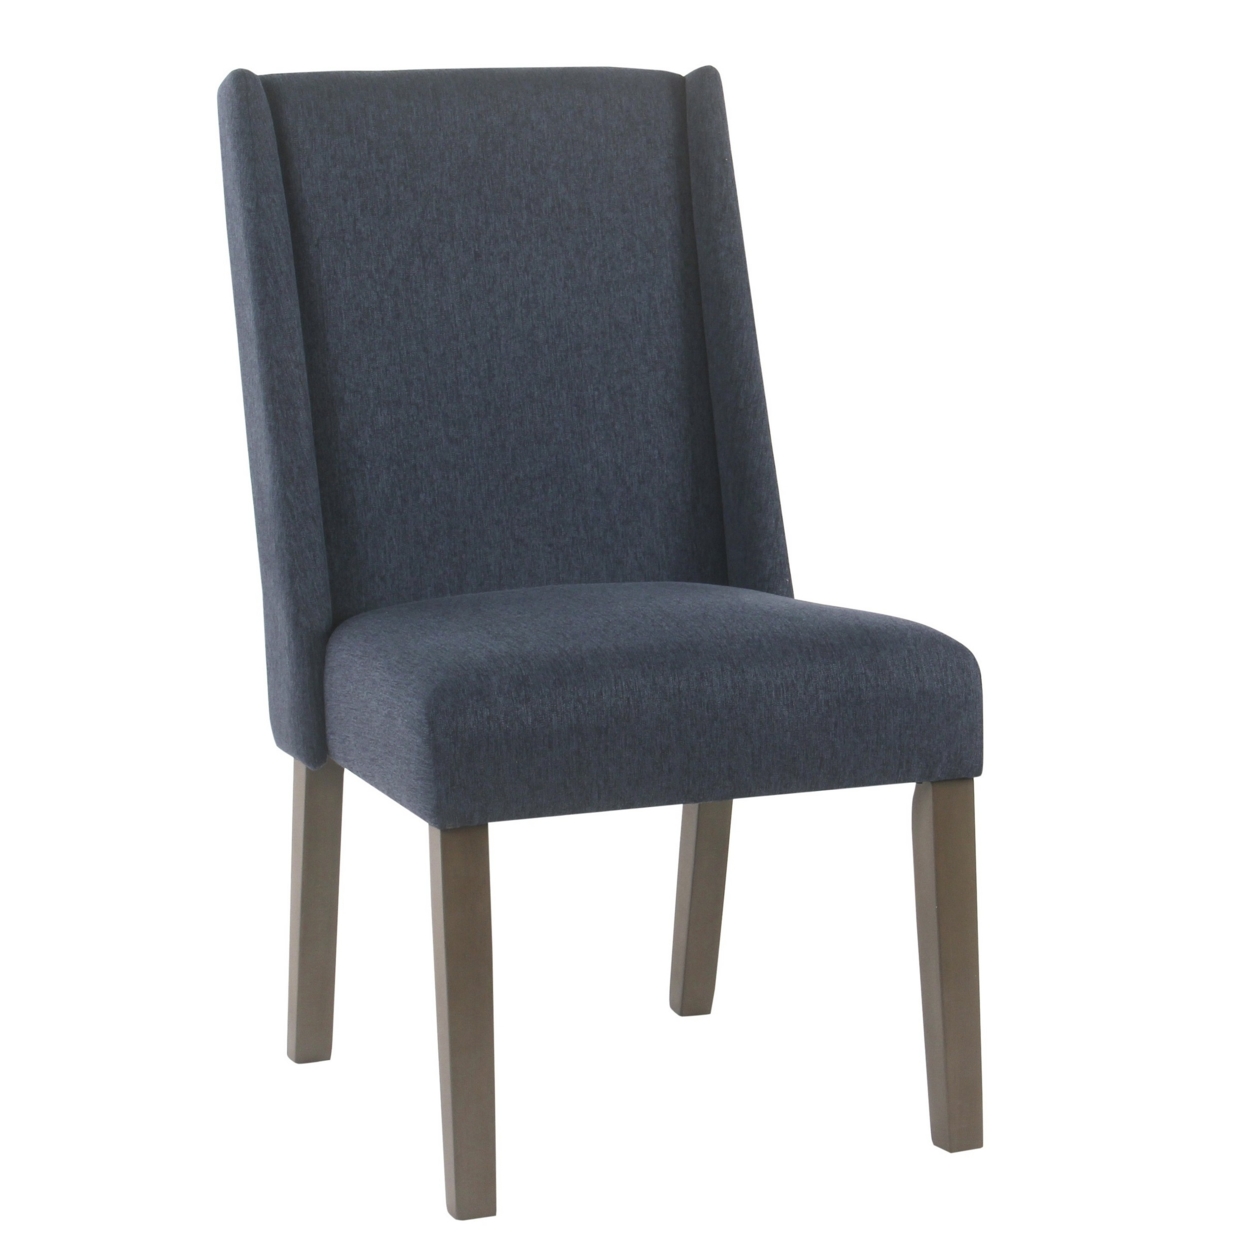 Fabric Upholstered Wooden Dining Chairs With Cushion Seat And Winged Sides, Blue, Set Of Two- Saltoro Sherpi